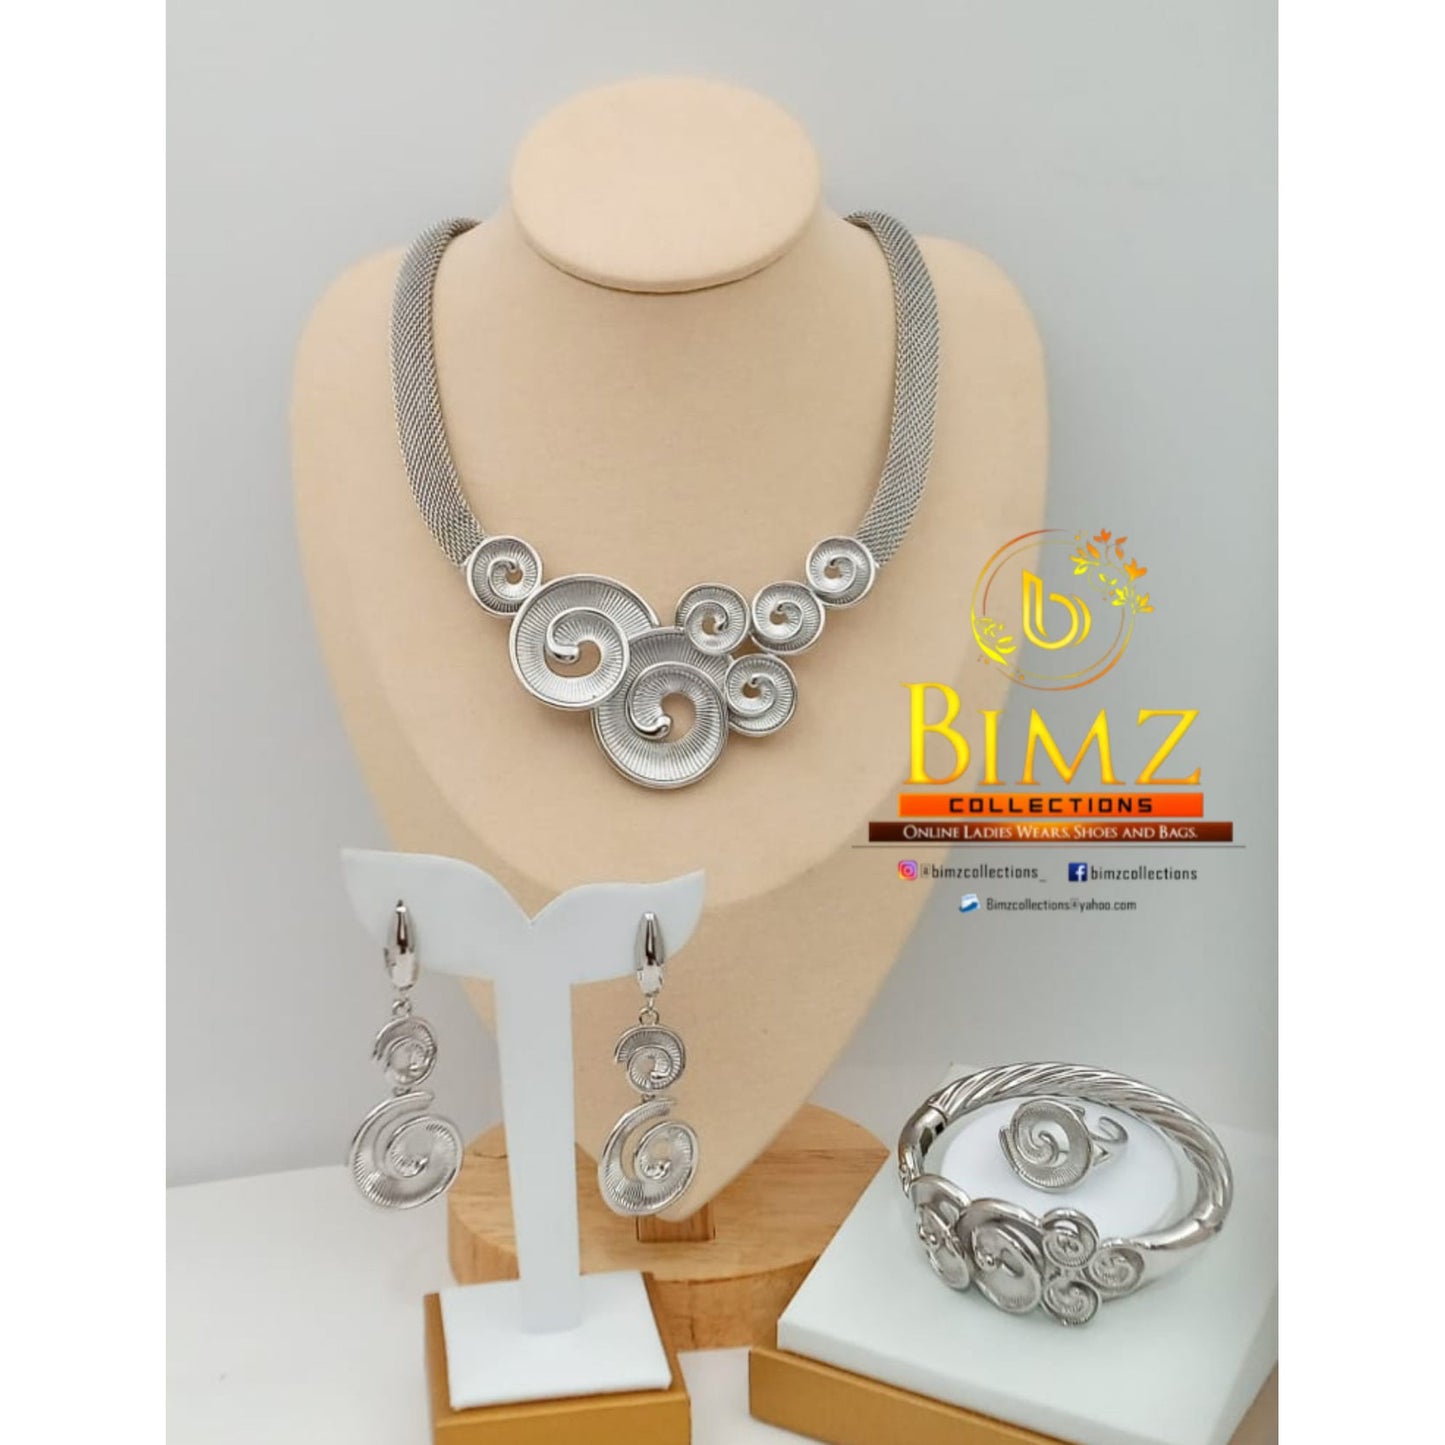 Sharon  Silver jewelry 5 in 1 Set